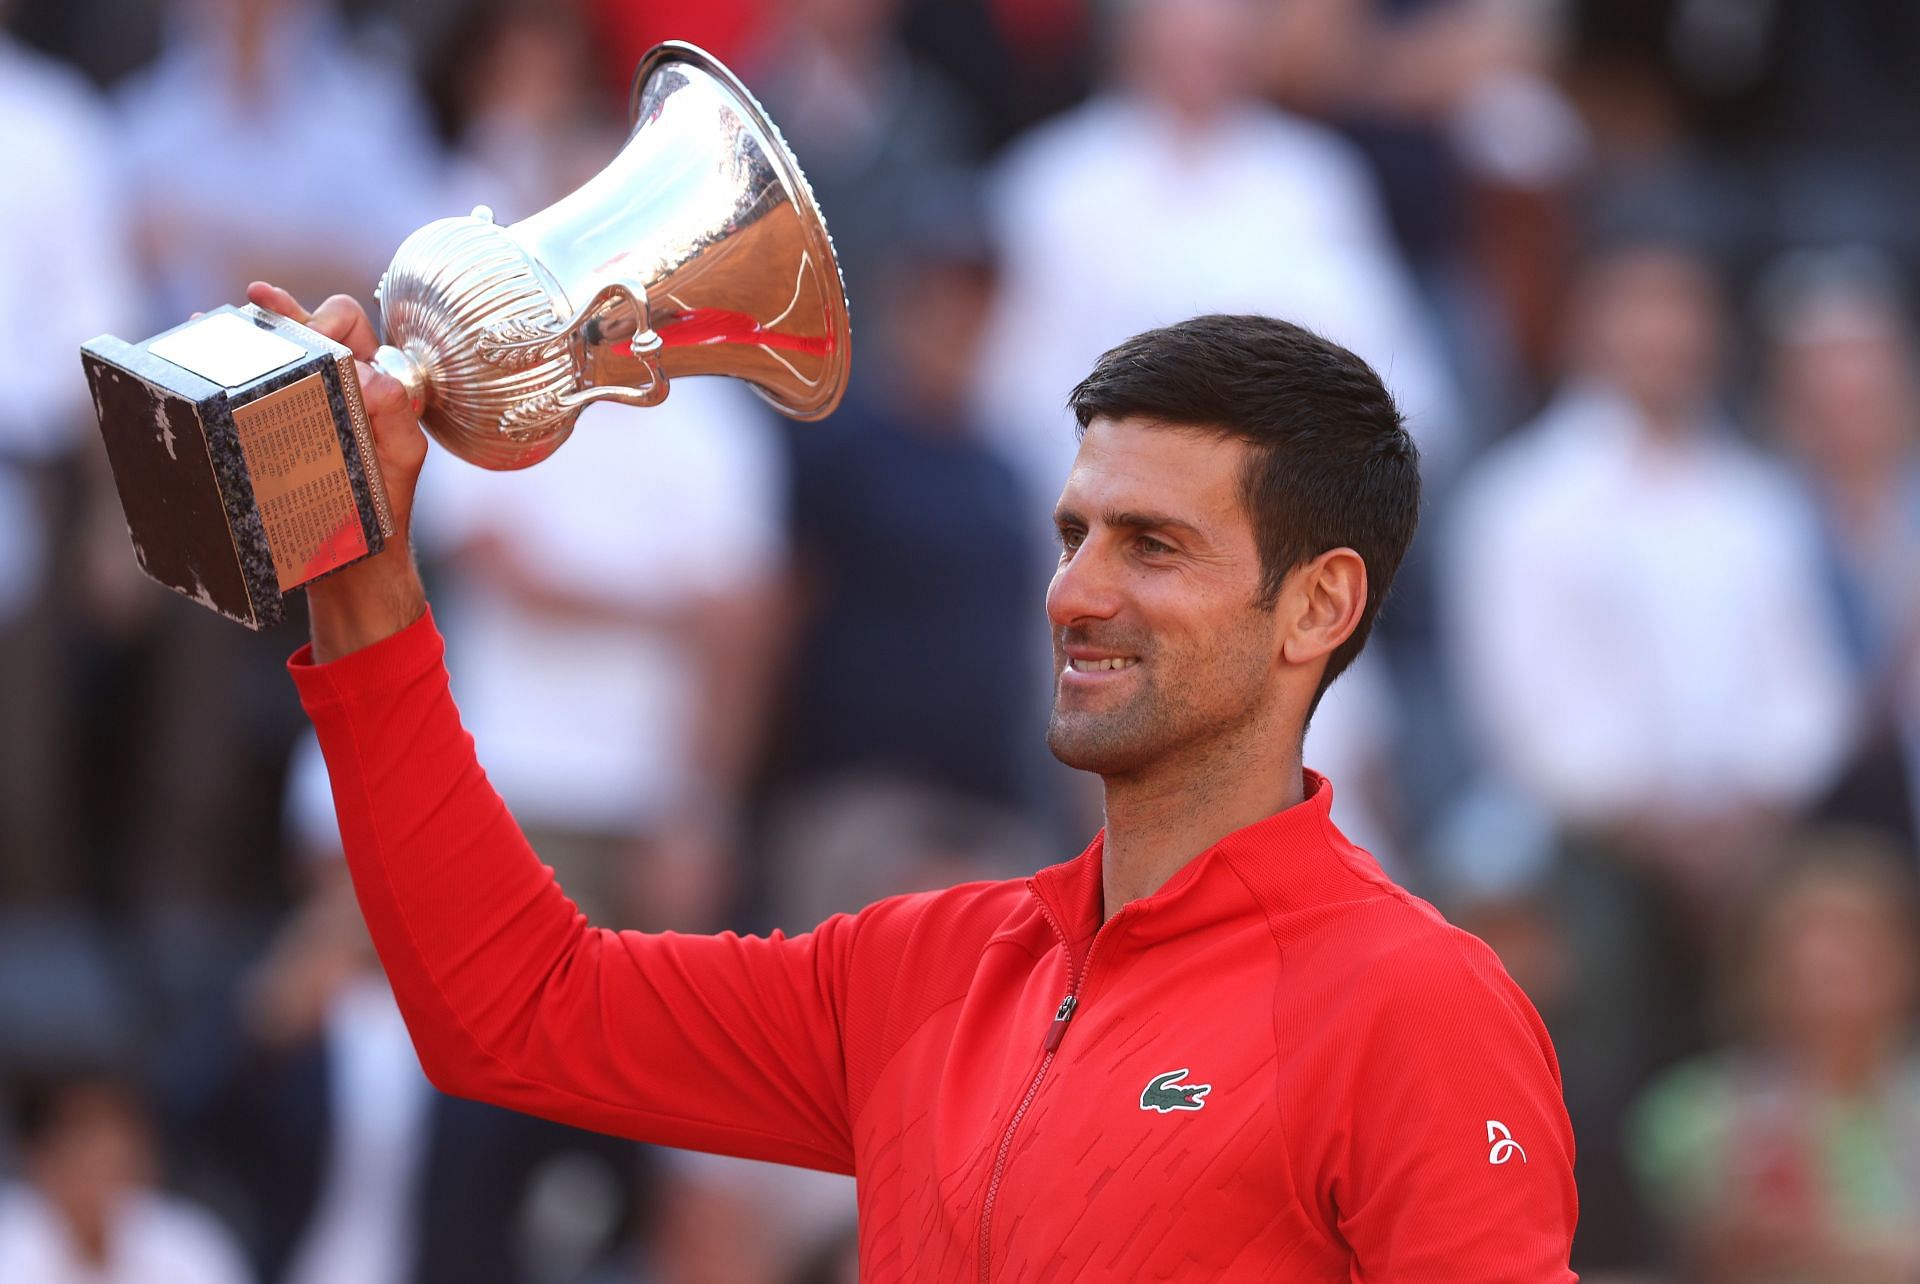 Novak Djokovics next match Opponent, venue, live streaming, TV channel and schedule French Open 2022, 2nd Round